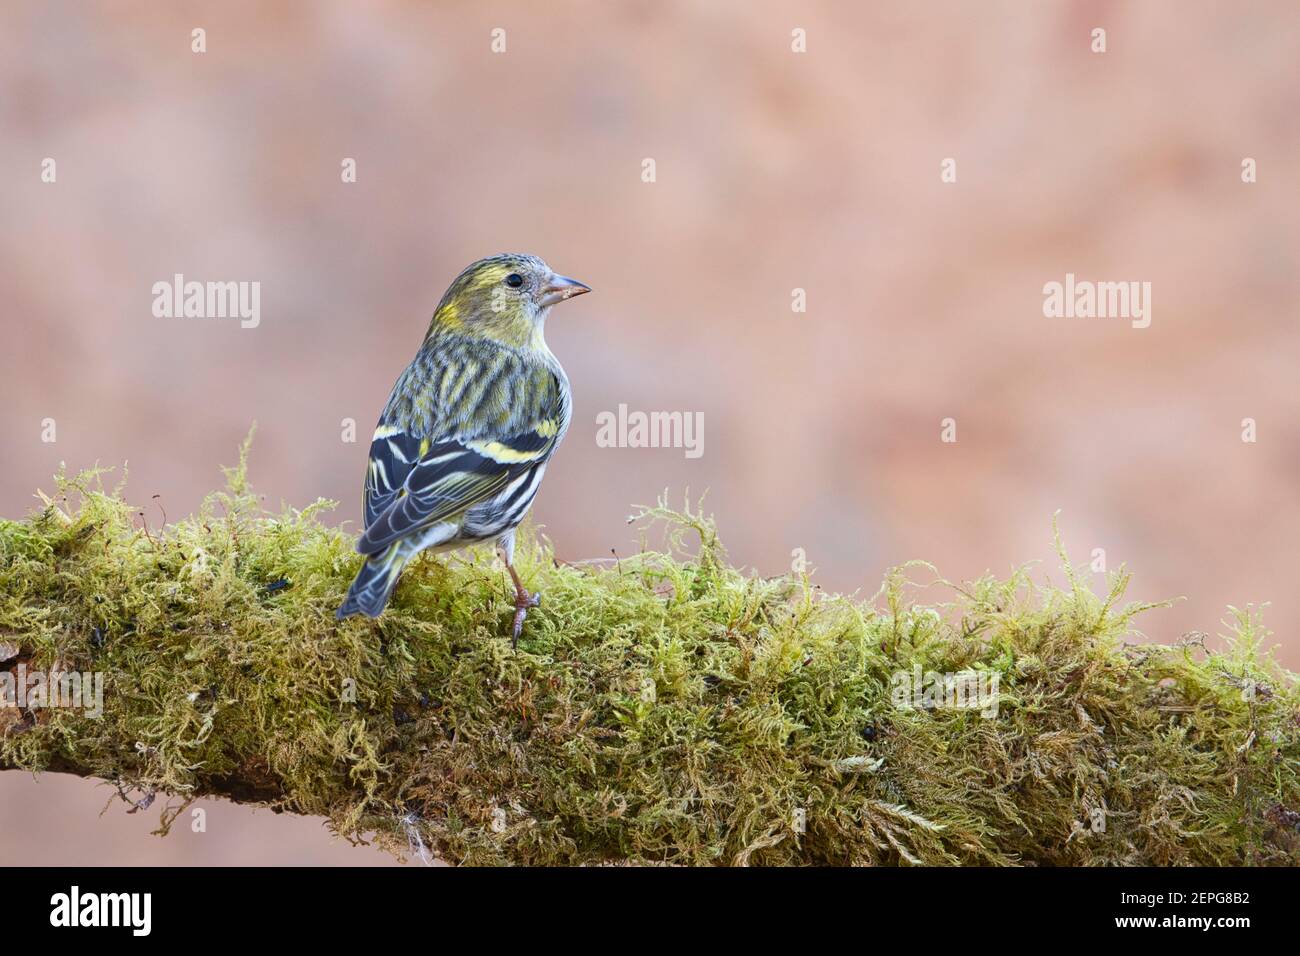 Female siskin (Carduelis spinus) perched on a mossy branch in a garden Stock Photo